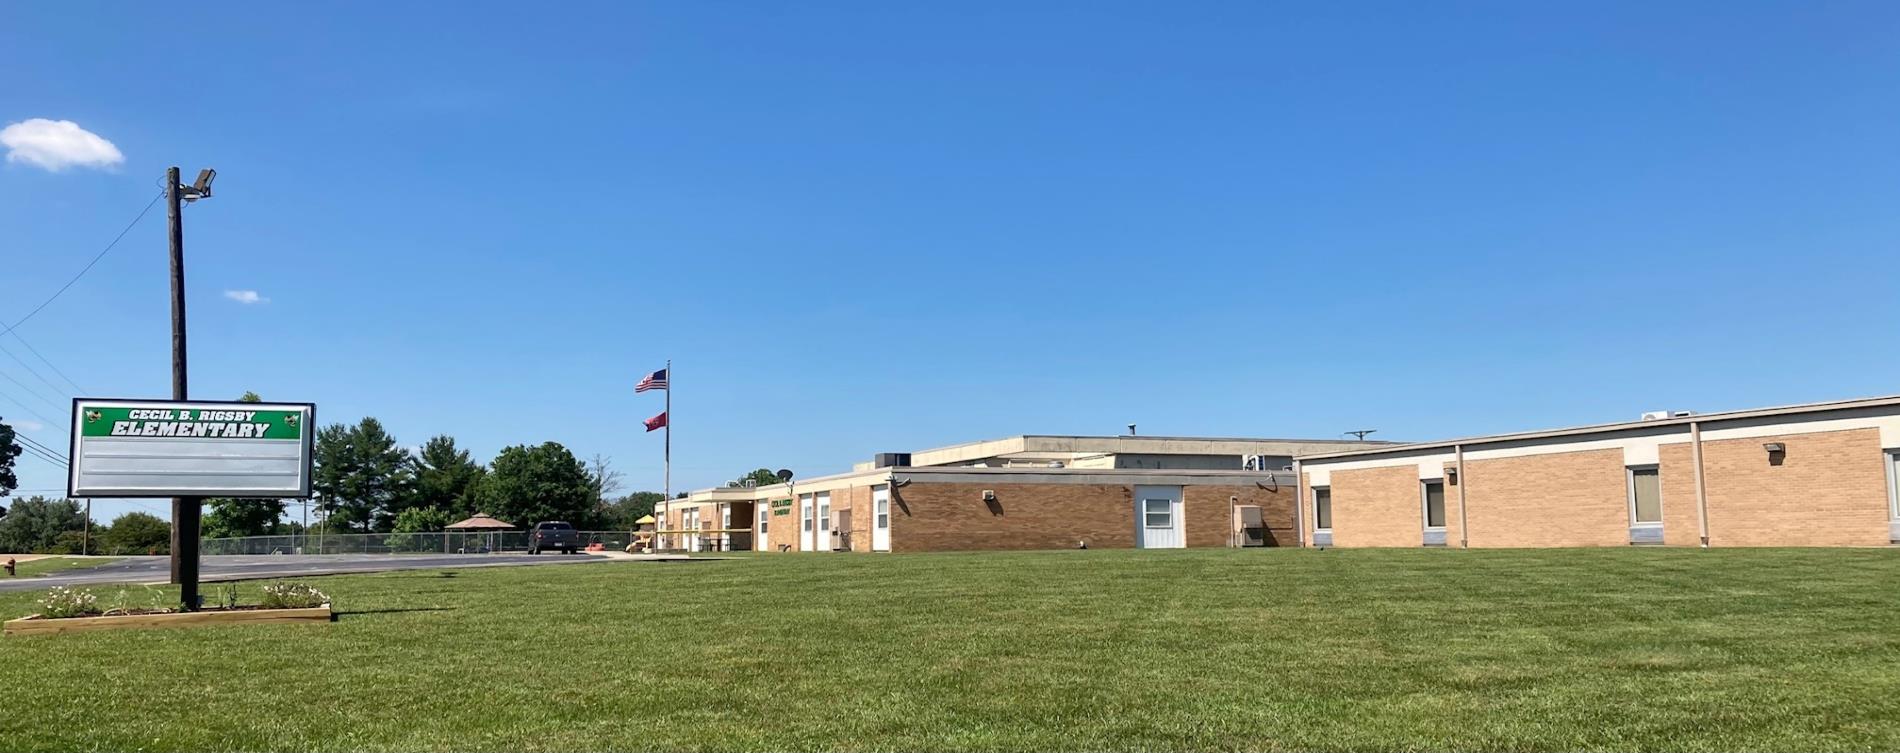 picture of rigsby elementary